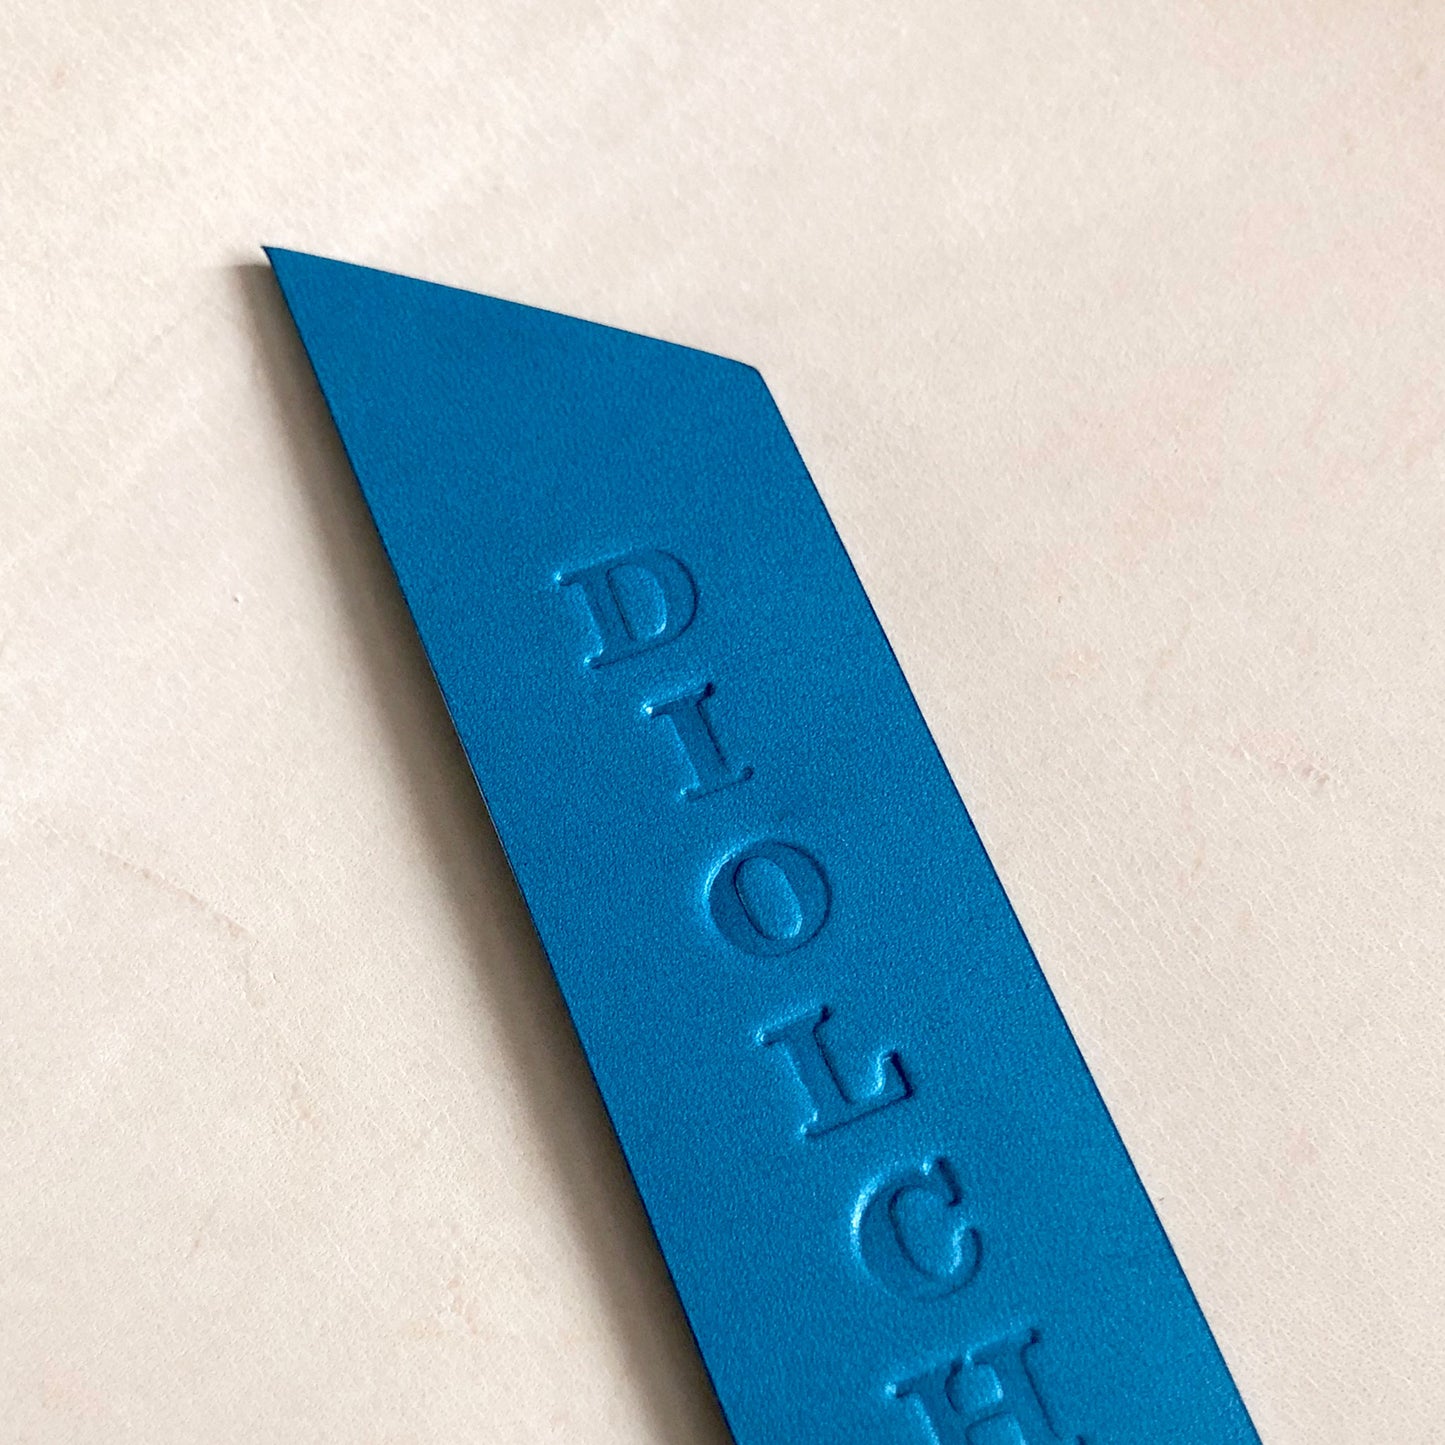 Handmade leather bookmark stamped with "DIOLCH"